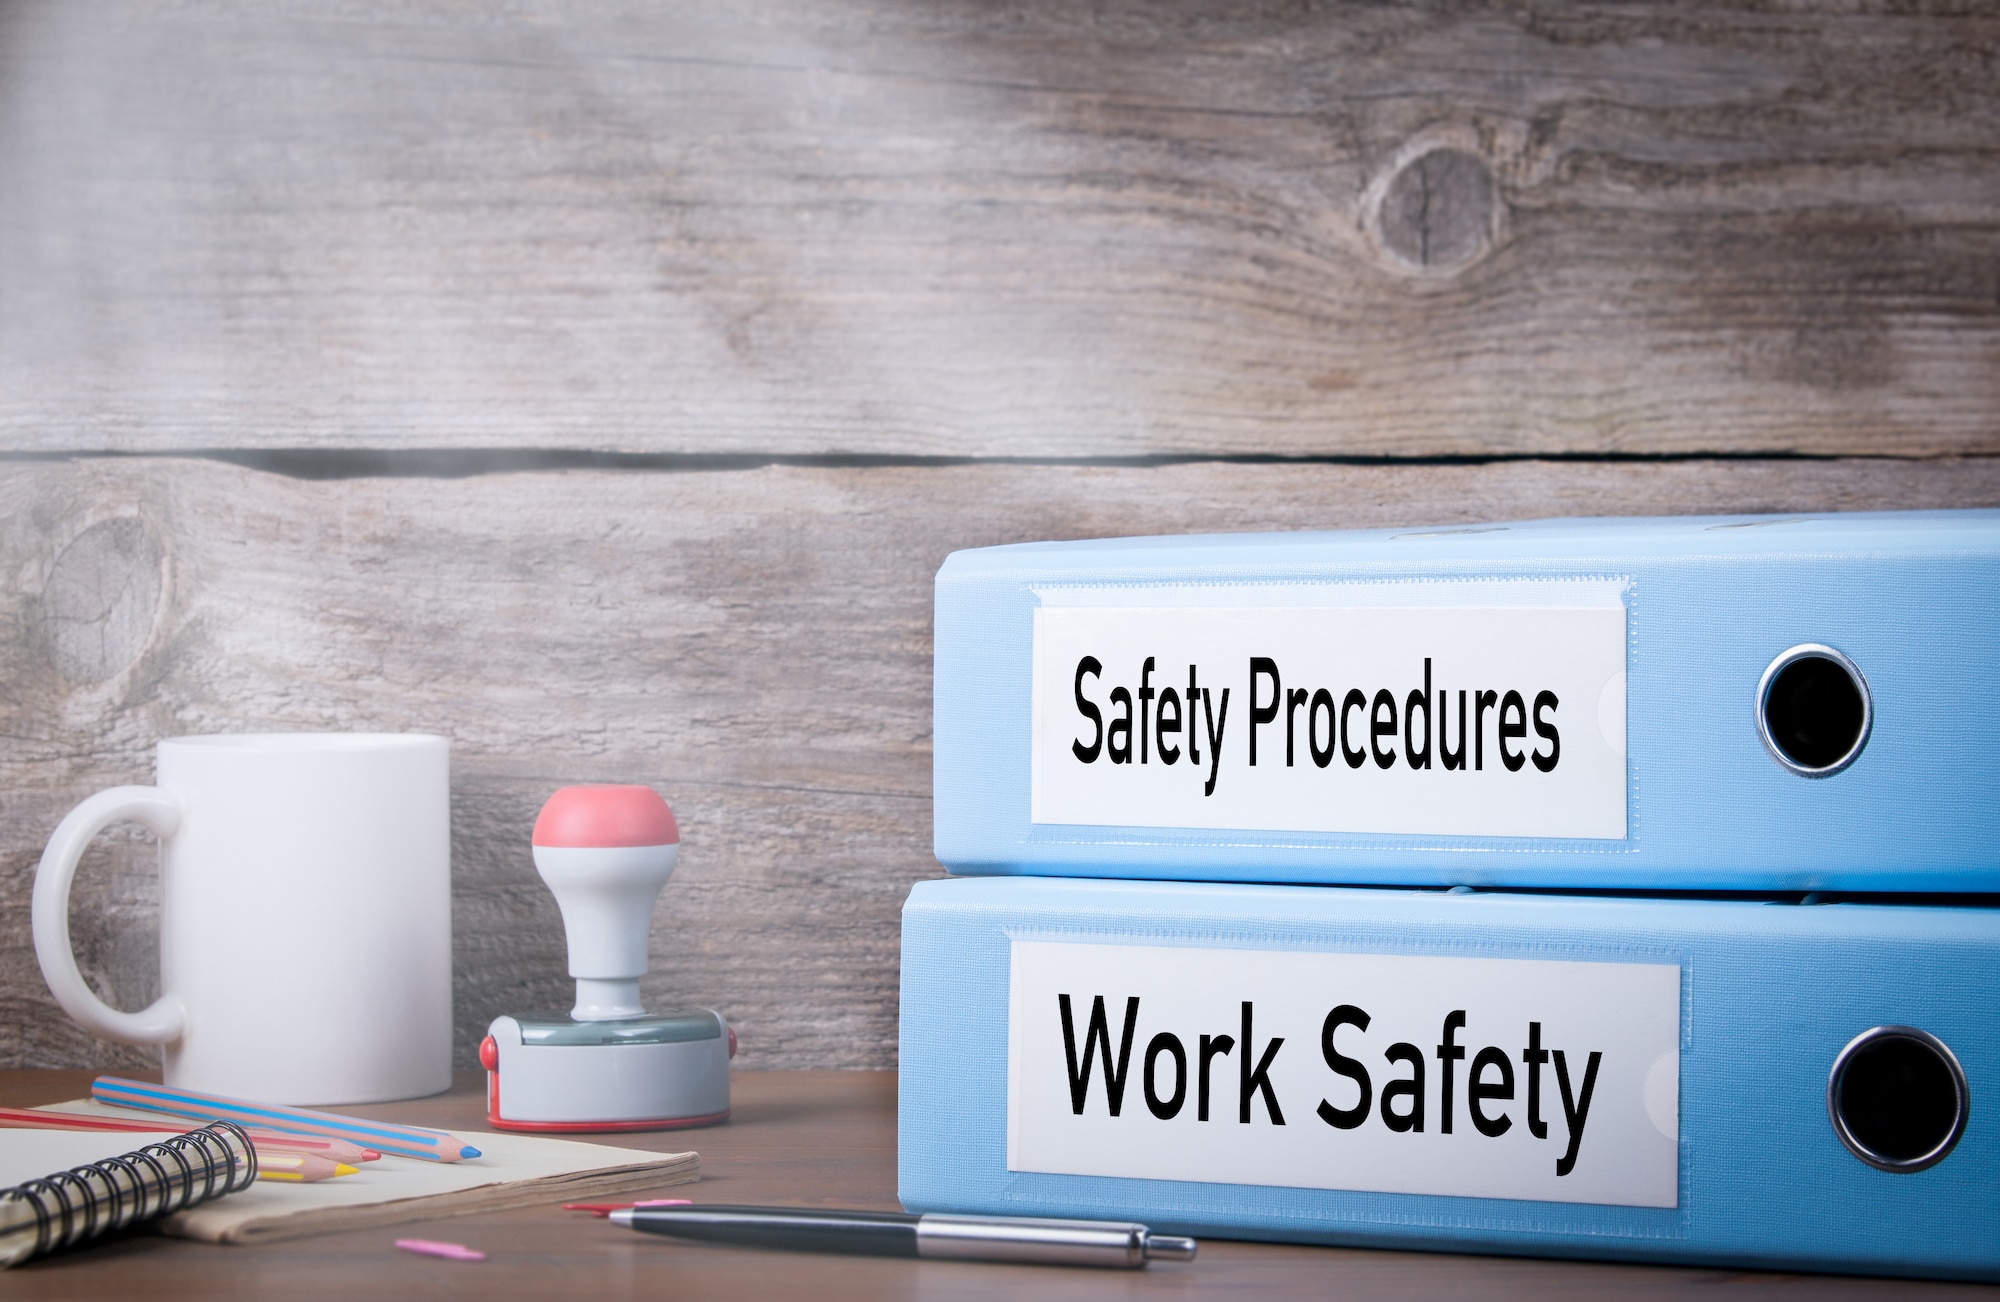 Safe and sound at work: Ergonomics science betters workplace environment